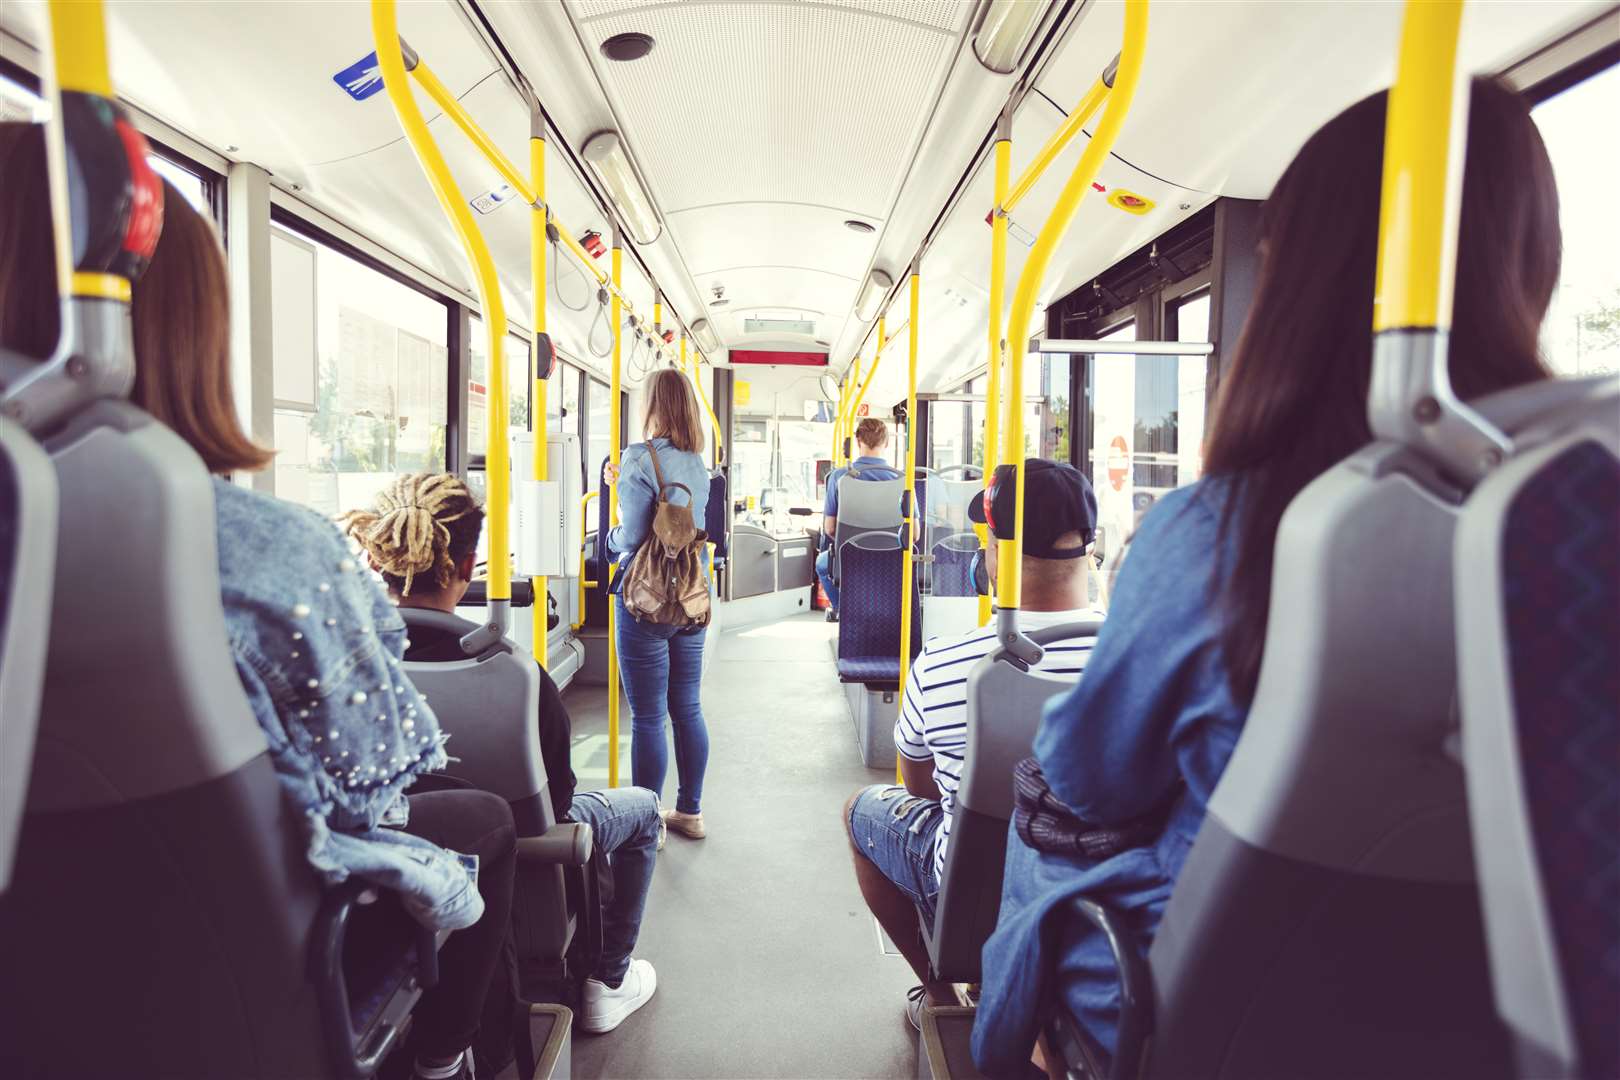 Using public transport can lower your carbon footprint. Picture: iStock.